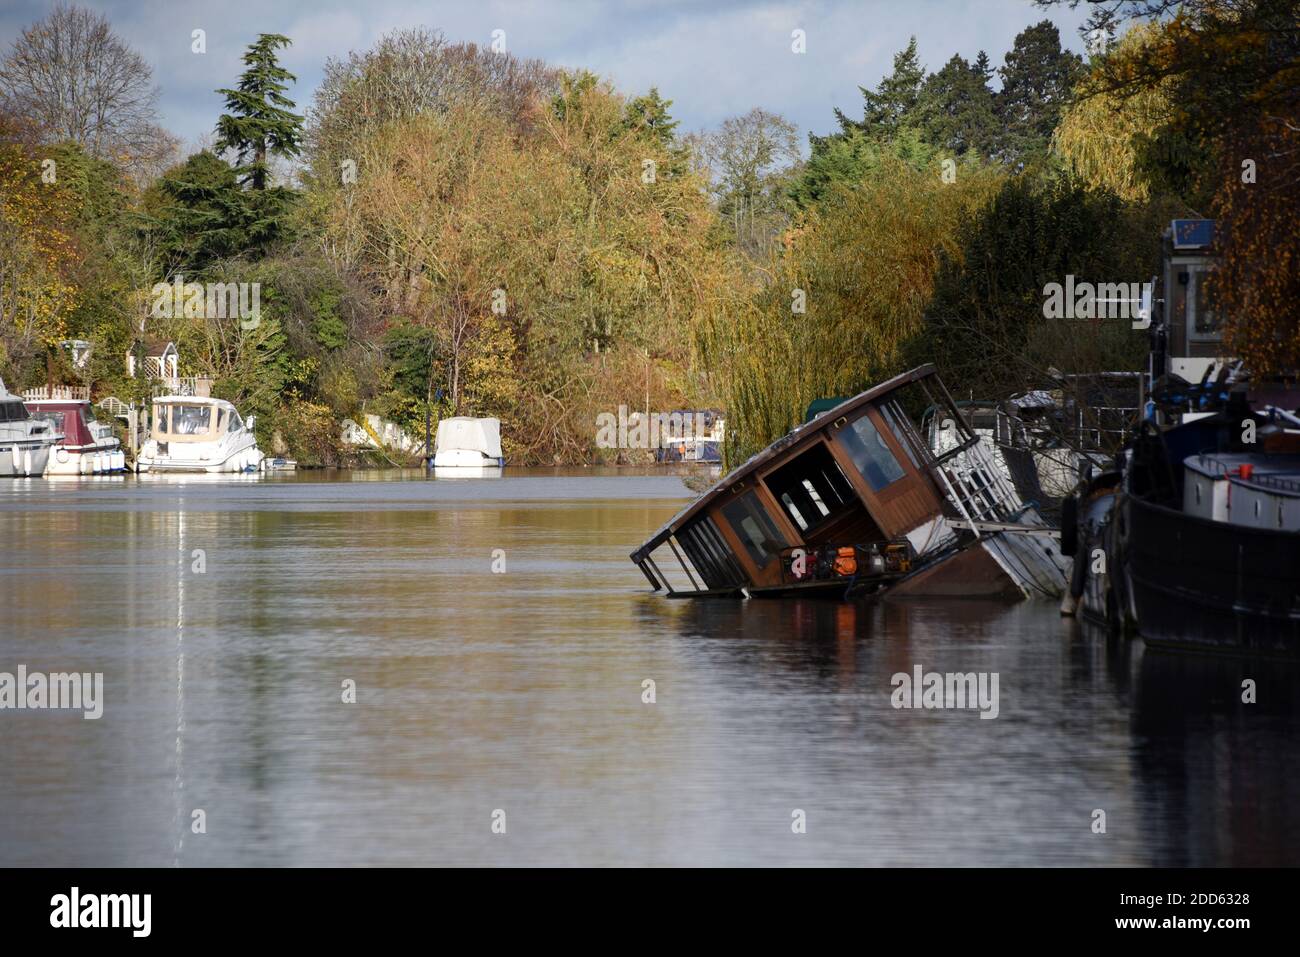 A sunken boat at an angle along the beautiful River Thames near Old Windsor Stock Photo